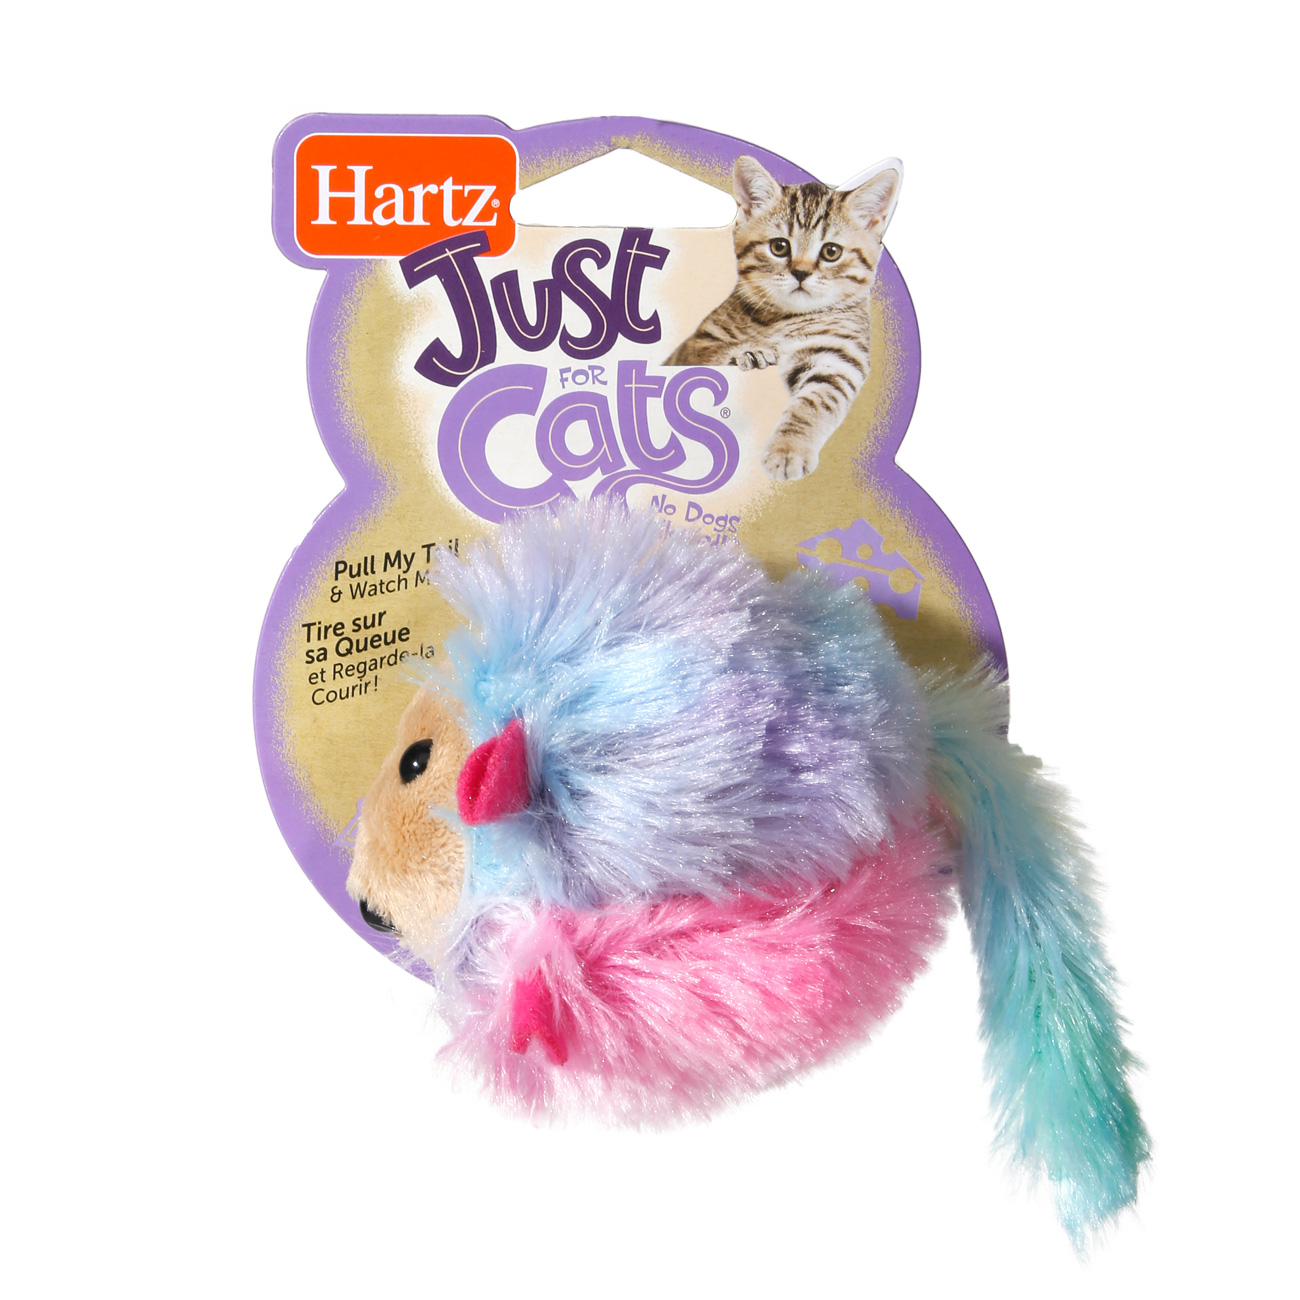 4 PACK RUFF N TUMBLE CATNIP MICE/MOUSE FOR CATS CAT TOY DRIVES CATS CRAZY NEW! 